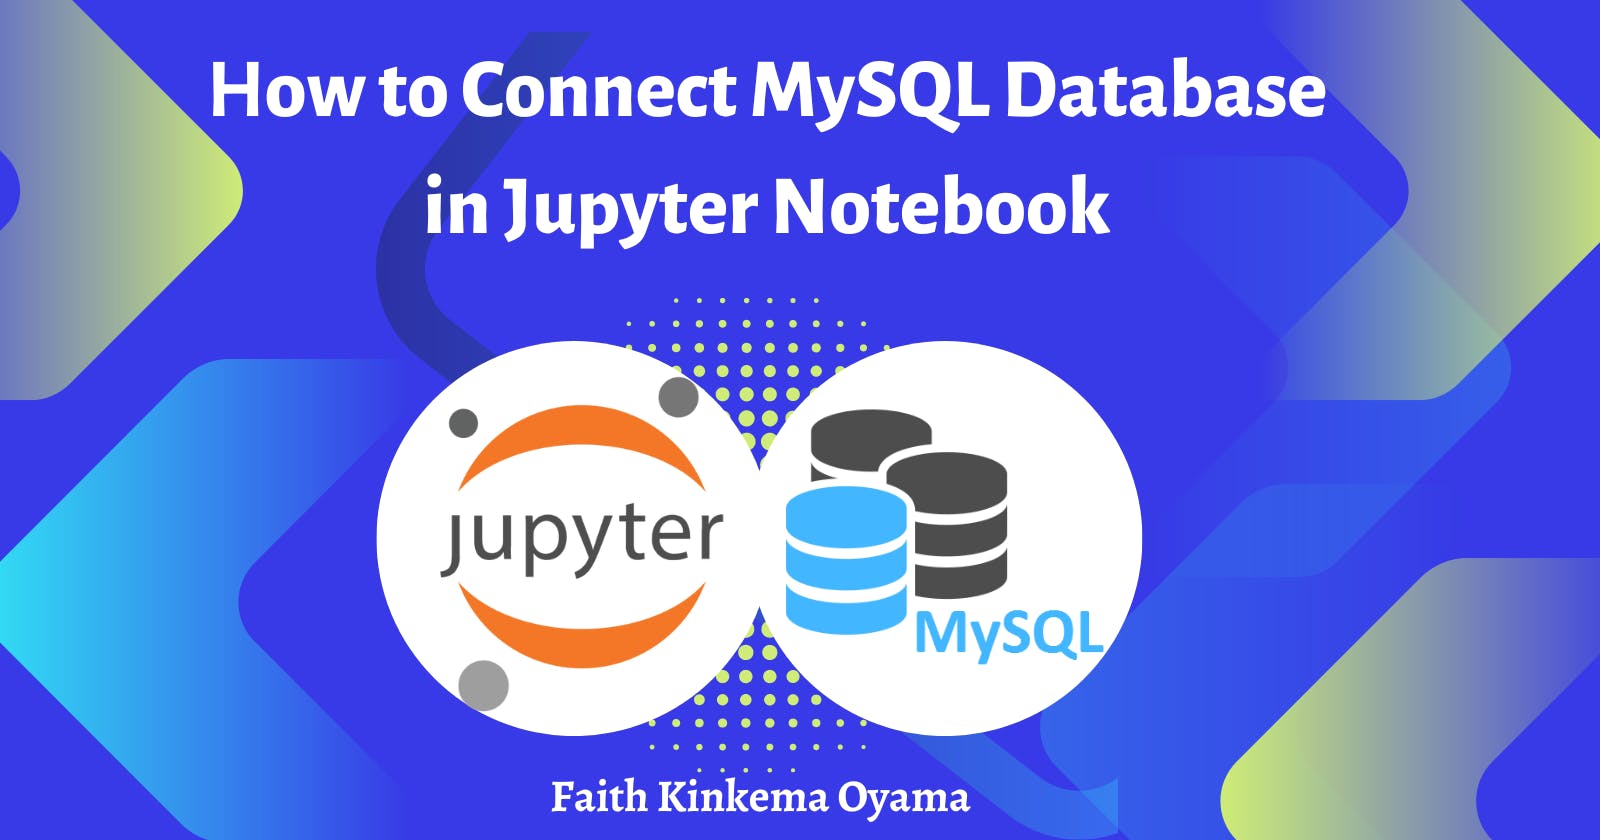 How to Connect MySQL Database in Jupyter Notebook